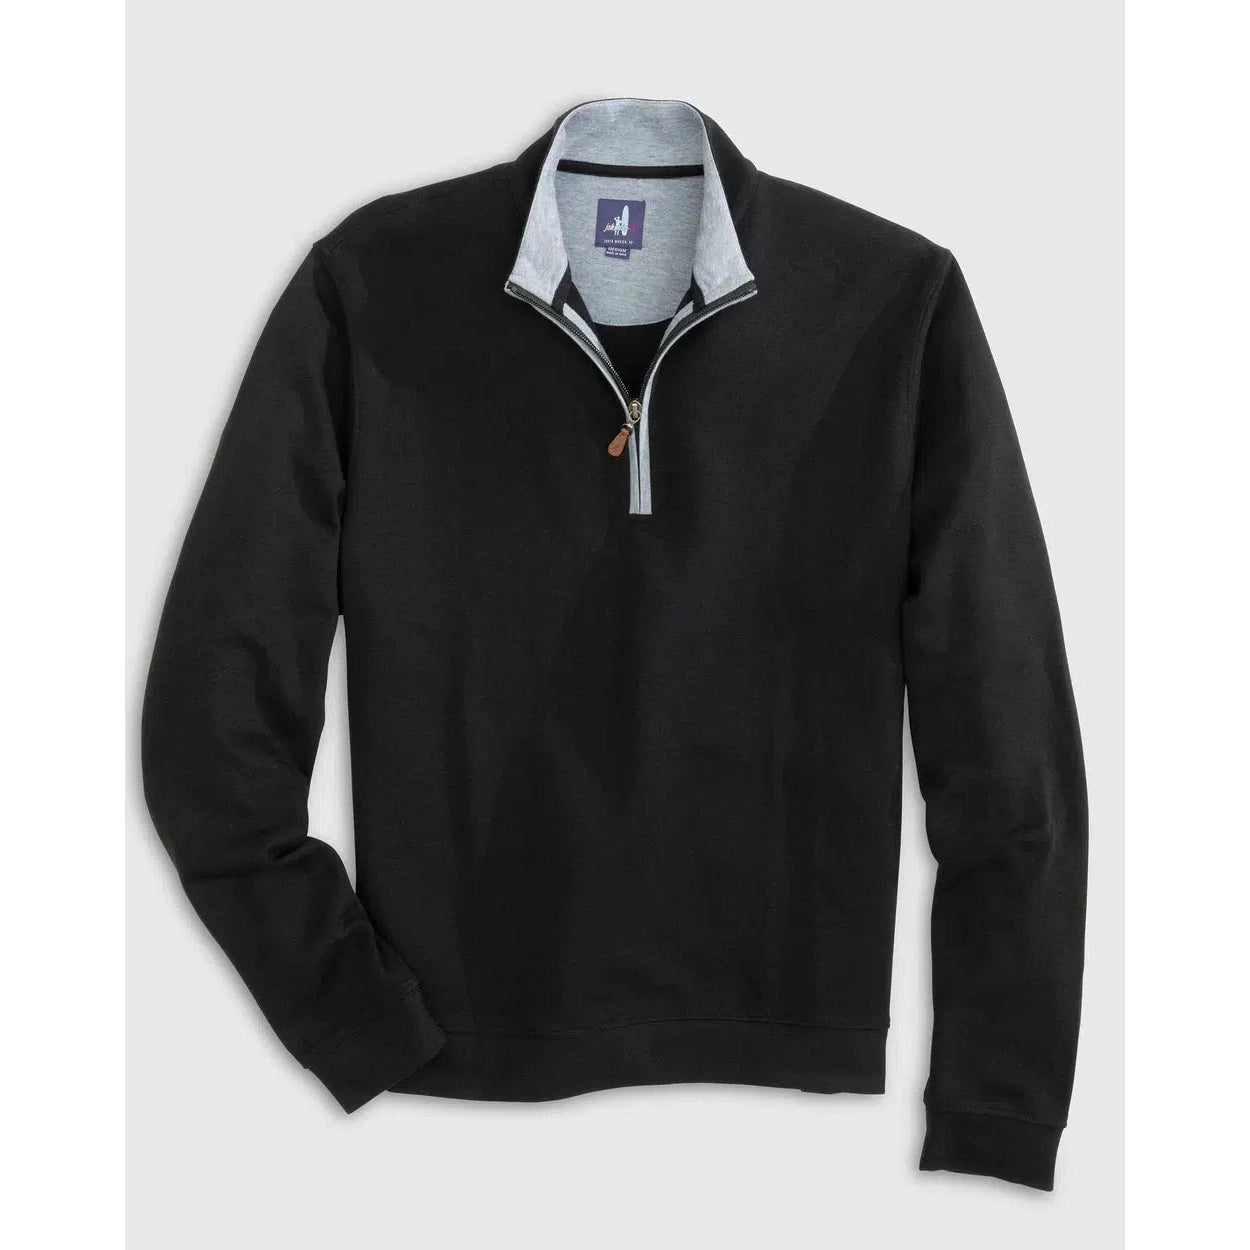 SULLY 1/4 ZIP-MENS SWEATERS & KNITS-JOHNNIE-O-JB Evans Fashions & Footwear